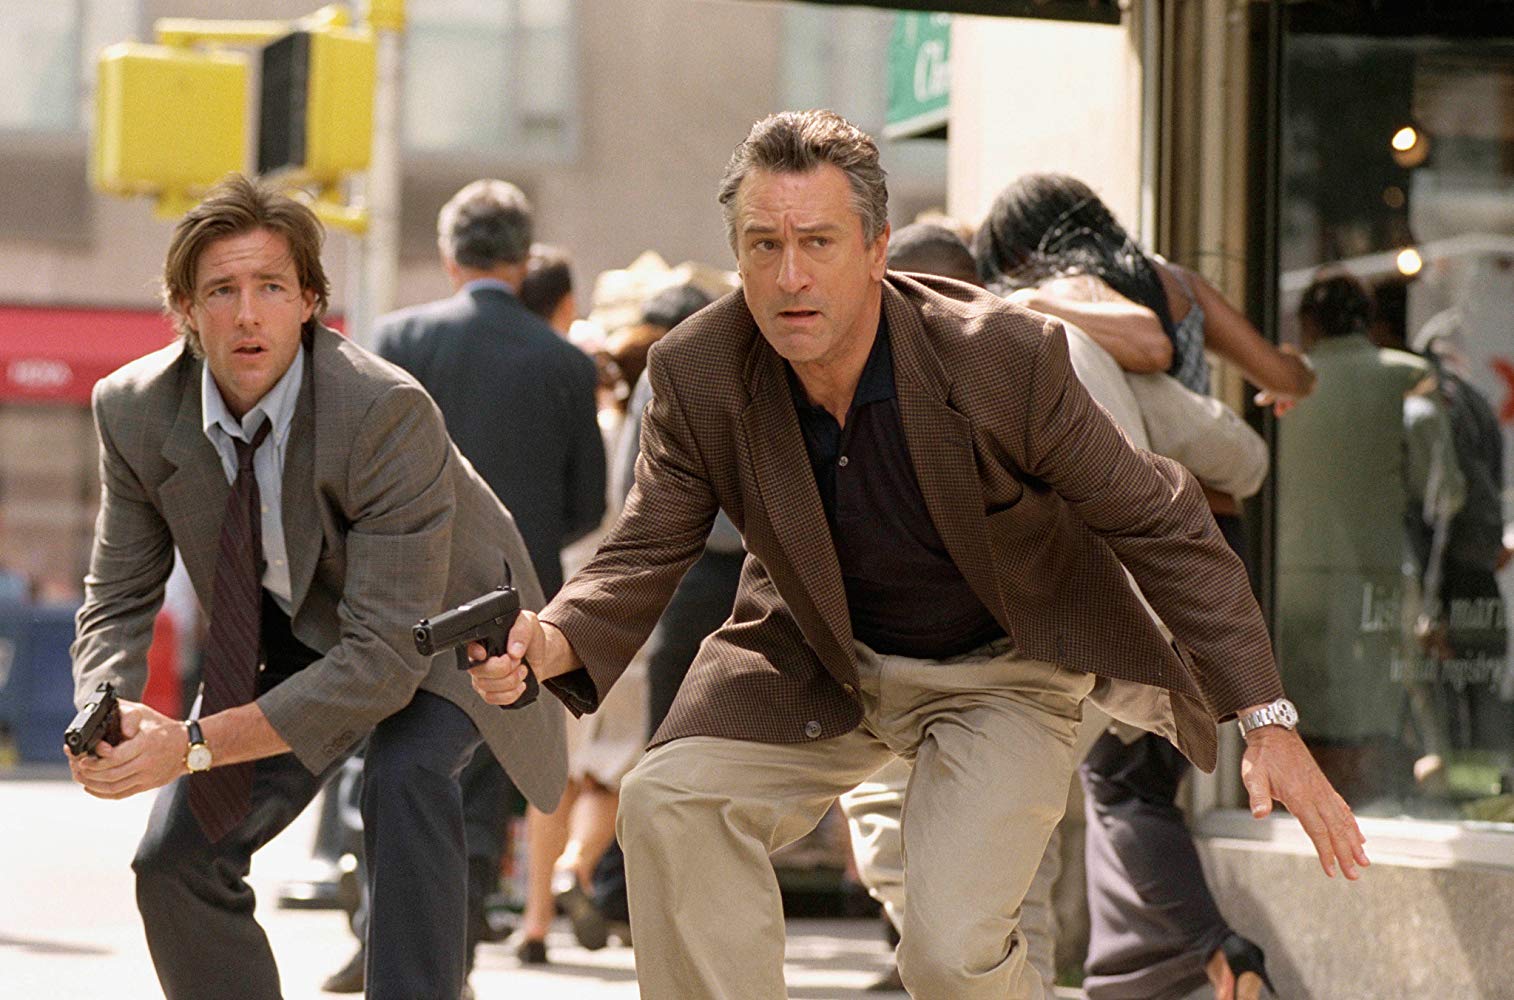 (l to r) Edward Burns and Robert De Niro teamed up to solve a crime in 15 Minutes (2001)